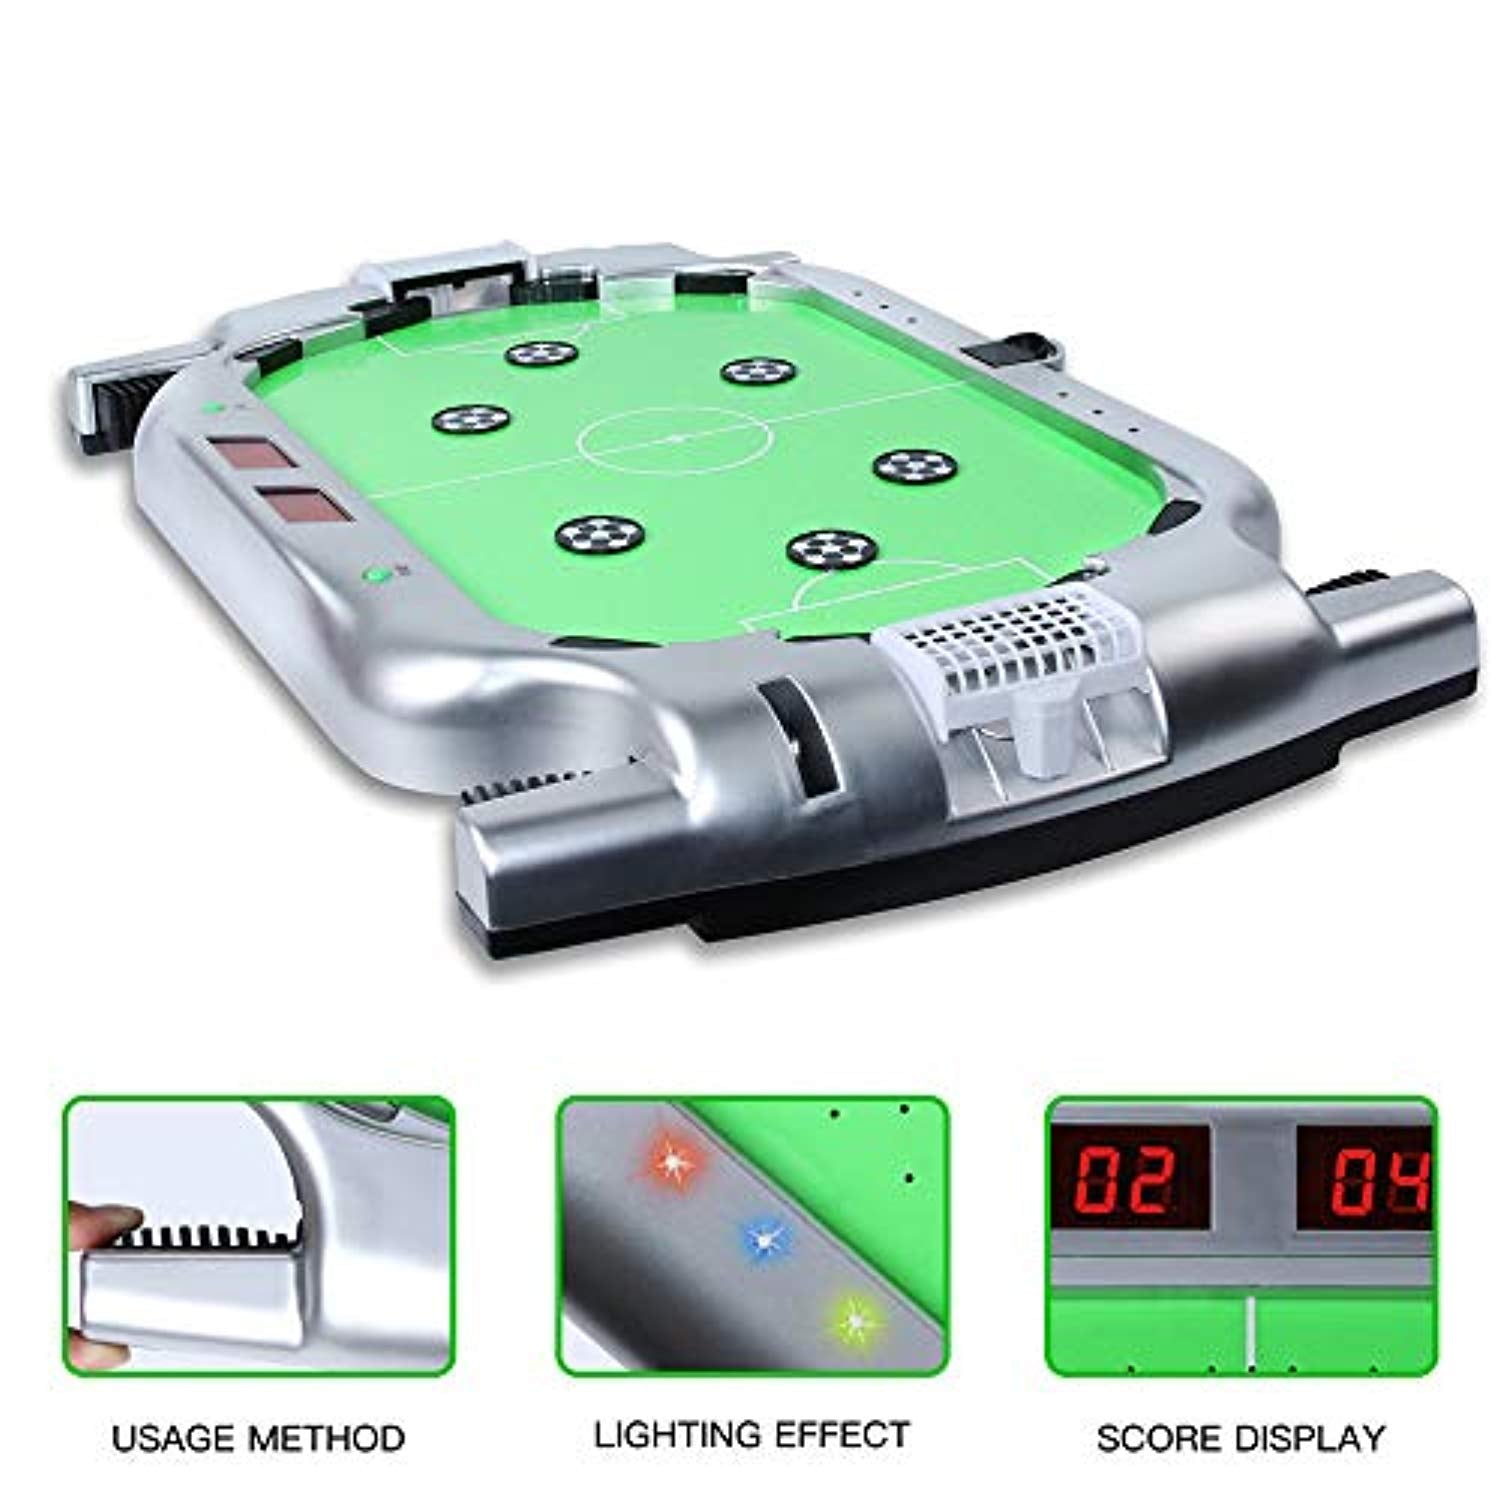 Bosonshop Tabletop Football Game, Fast Paced Action Game Lots of Fun for Kids